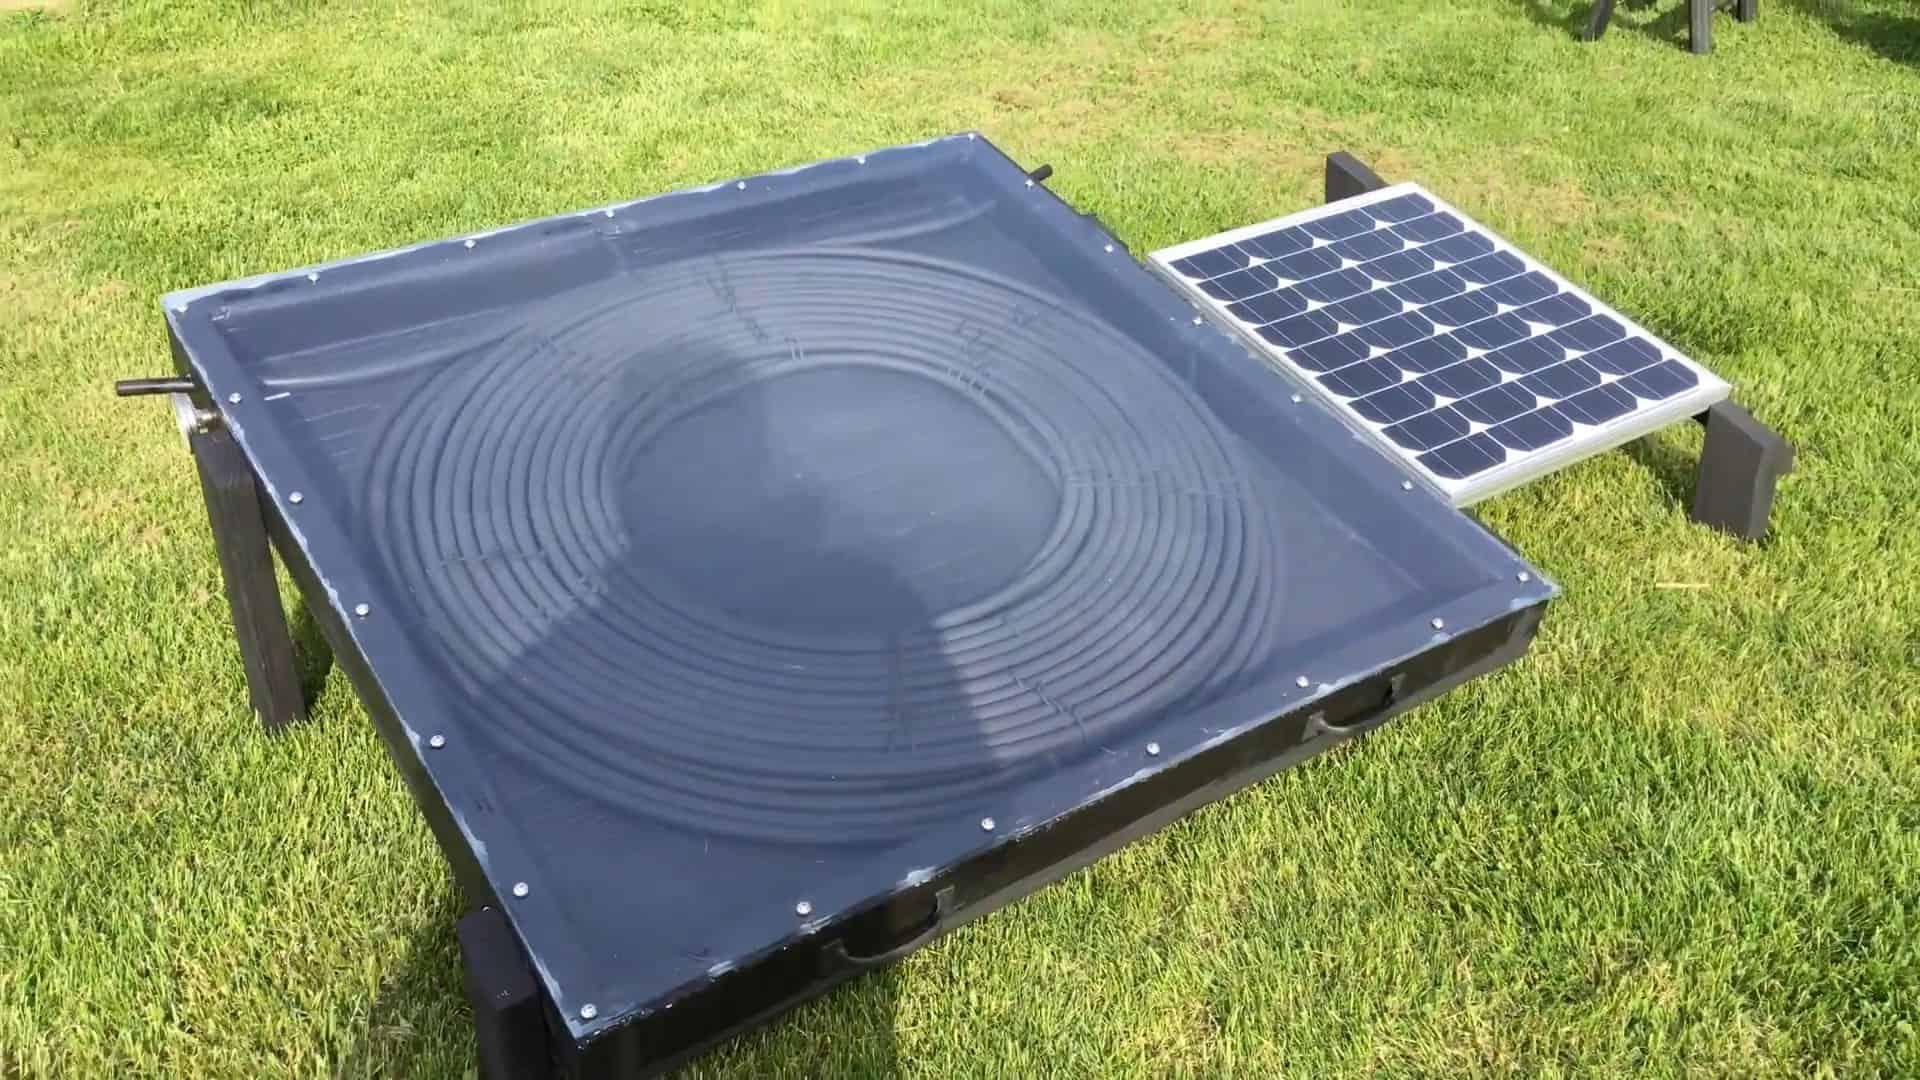 DIY Solar Water Heater: How To Build Your Own Renewable Energy Solution